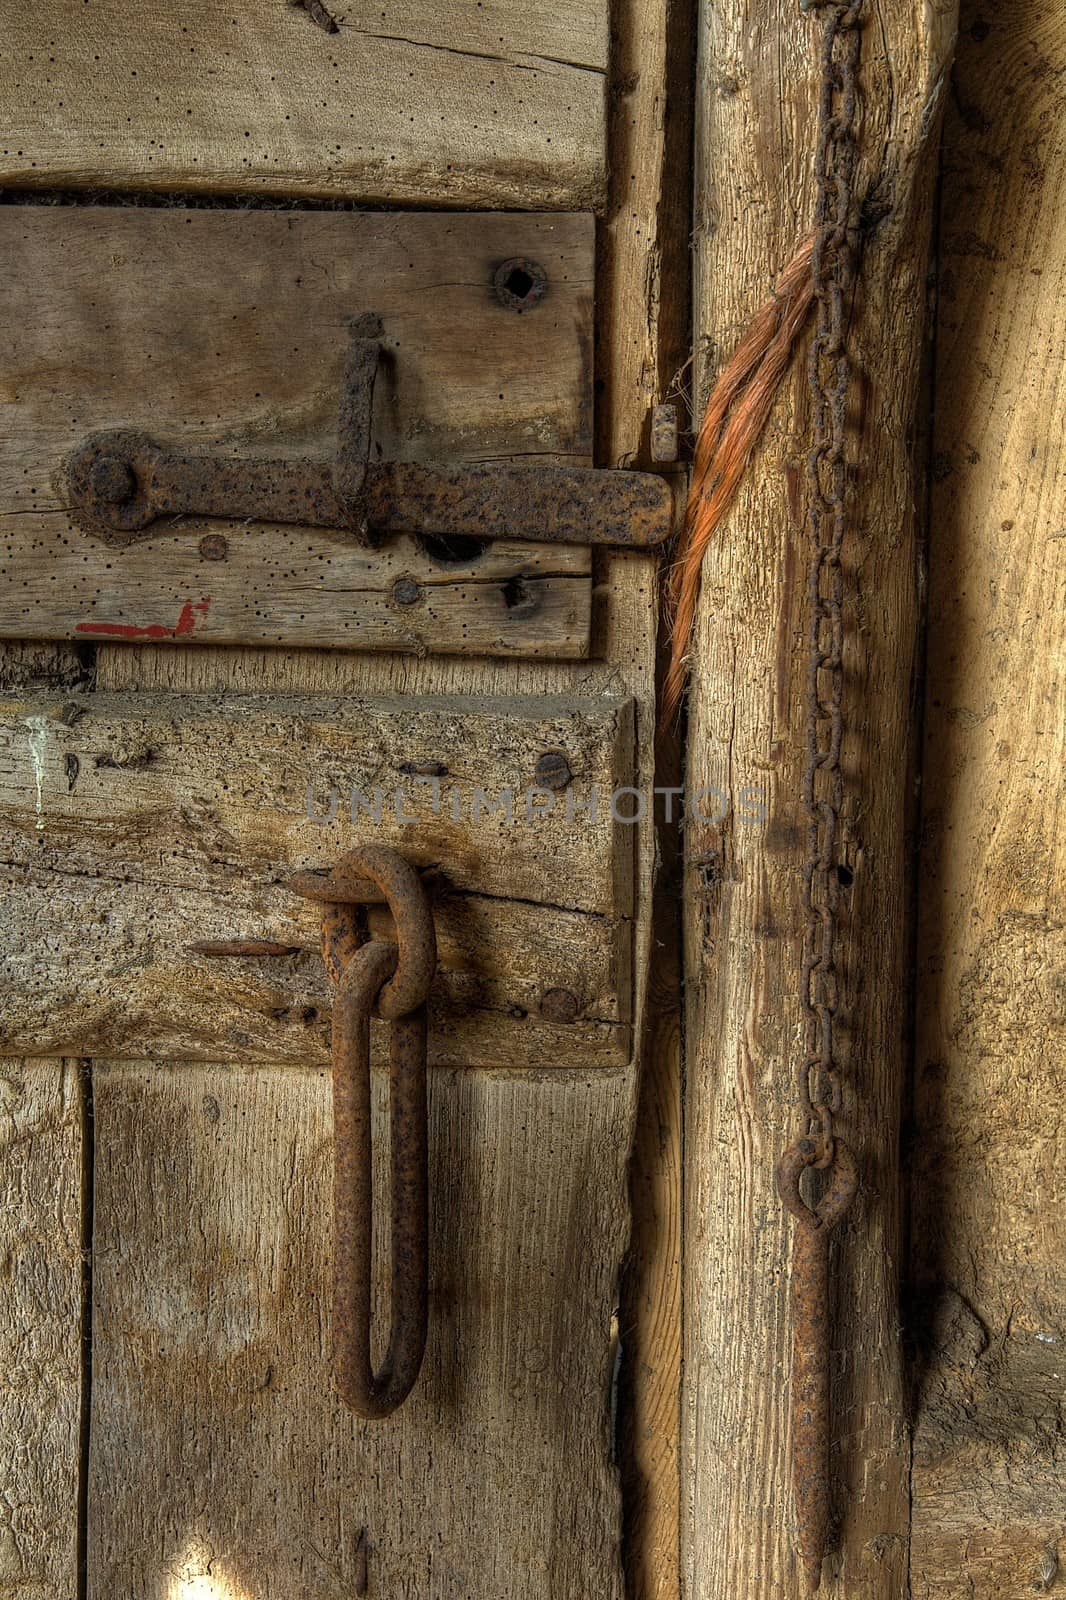 Old stable door with latch, Worcestershire, England.